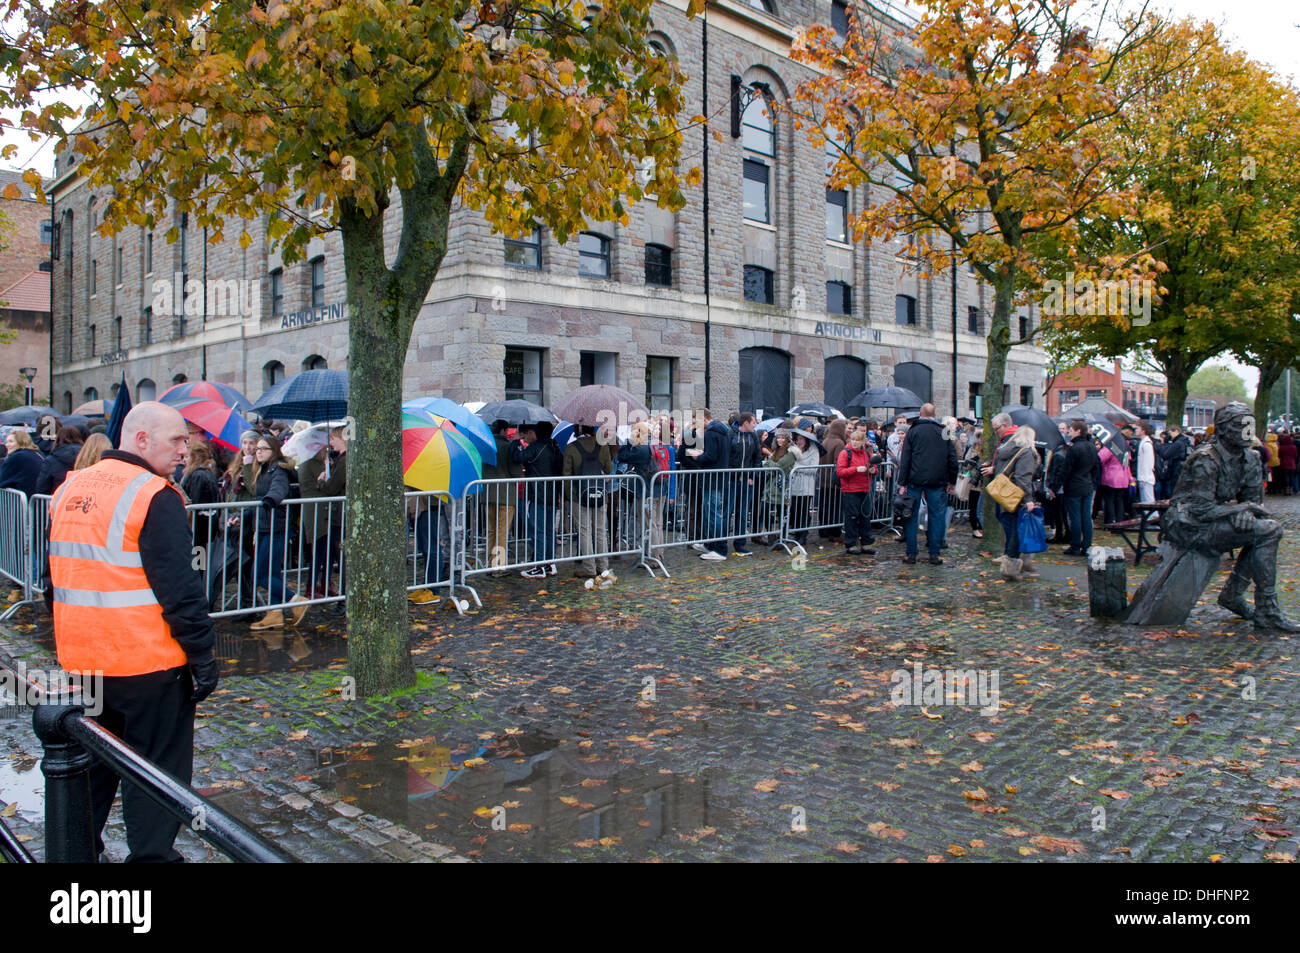 Bristol, UK. 09th Nov, 2013. Queues of young hopefuls wait patiently in the rain for Disney's first open casting auditions for the new Star Wars film, being held at the Arnolfini Arts Centre in the centre of Bristol on 9th & 10th November.  Some of which have been queuing since 10pm the night before.  Taken on 9th November 2013. Credit:  Rachel Husband/Alamy Live News Stock Photo